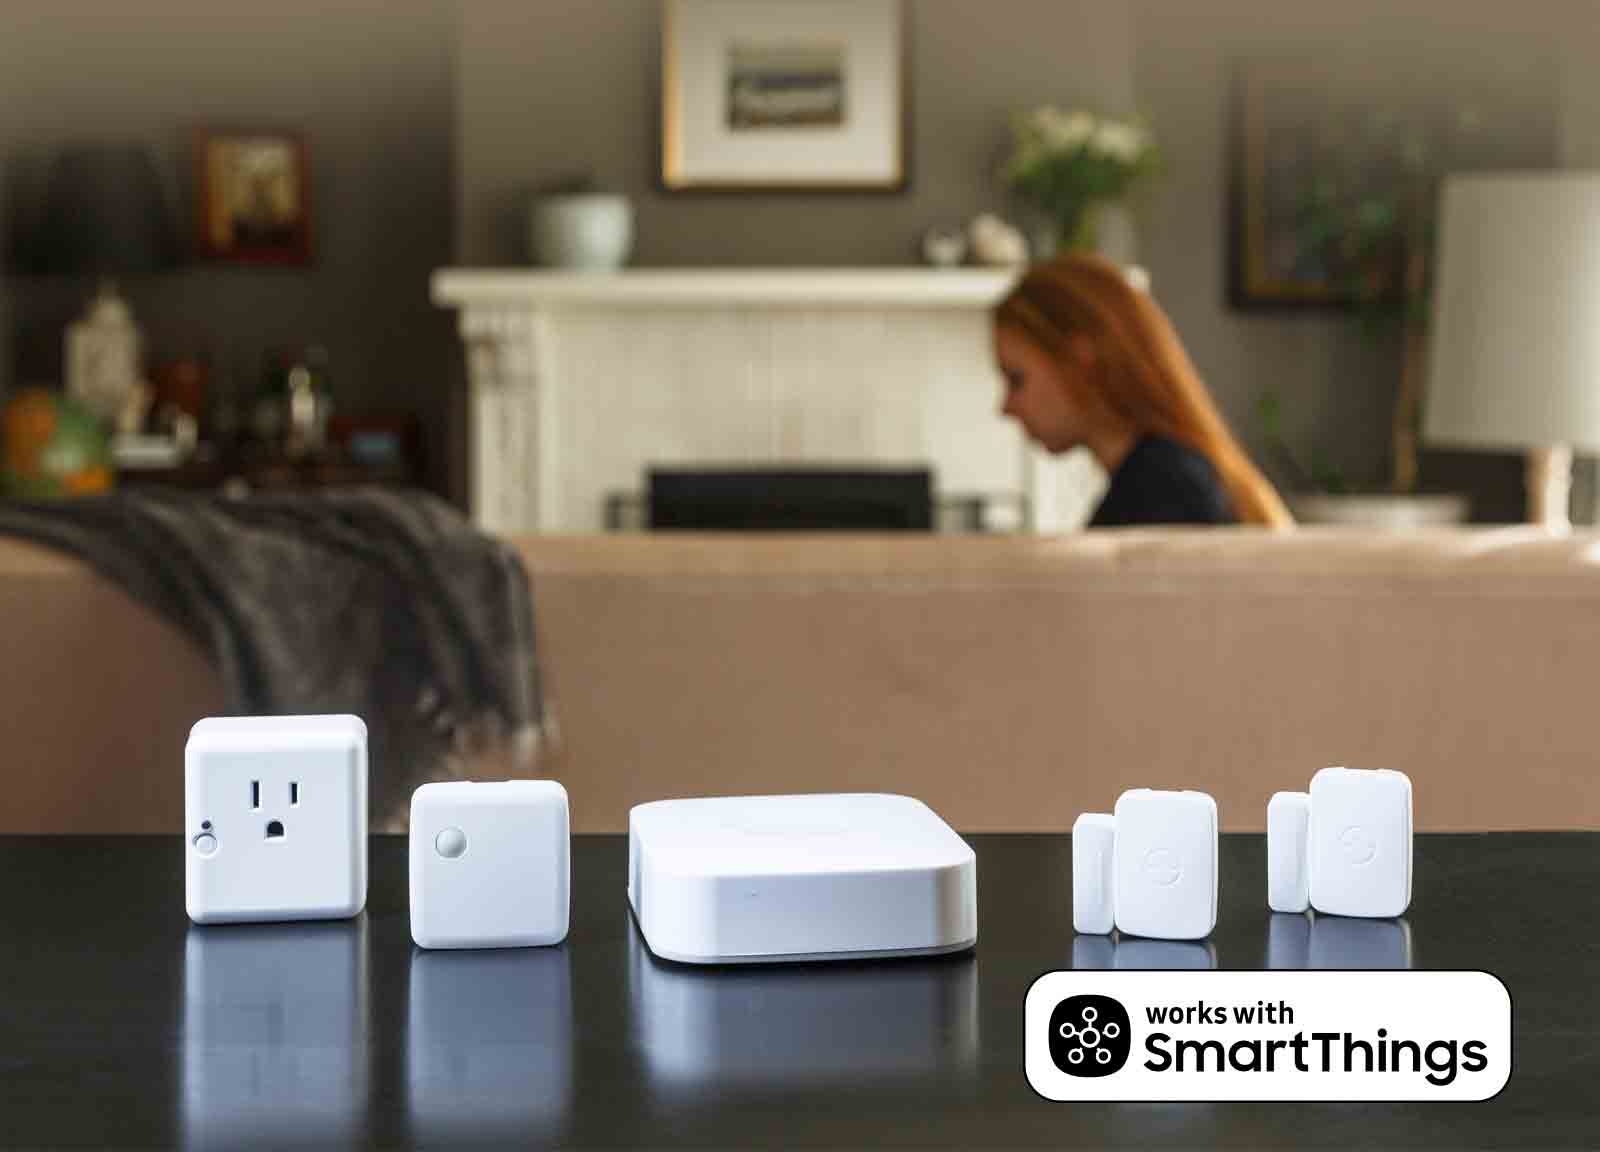 Locks that work with Samsung SmartThings